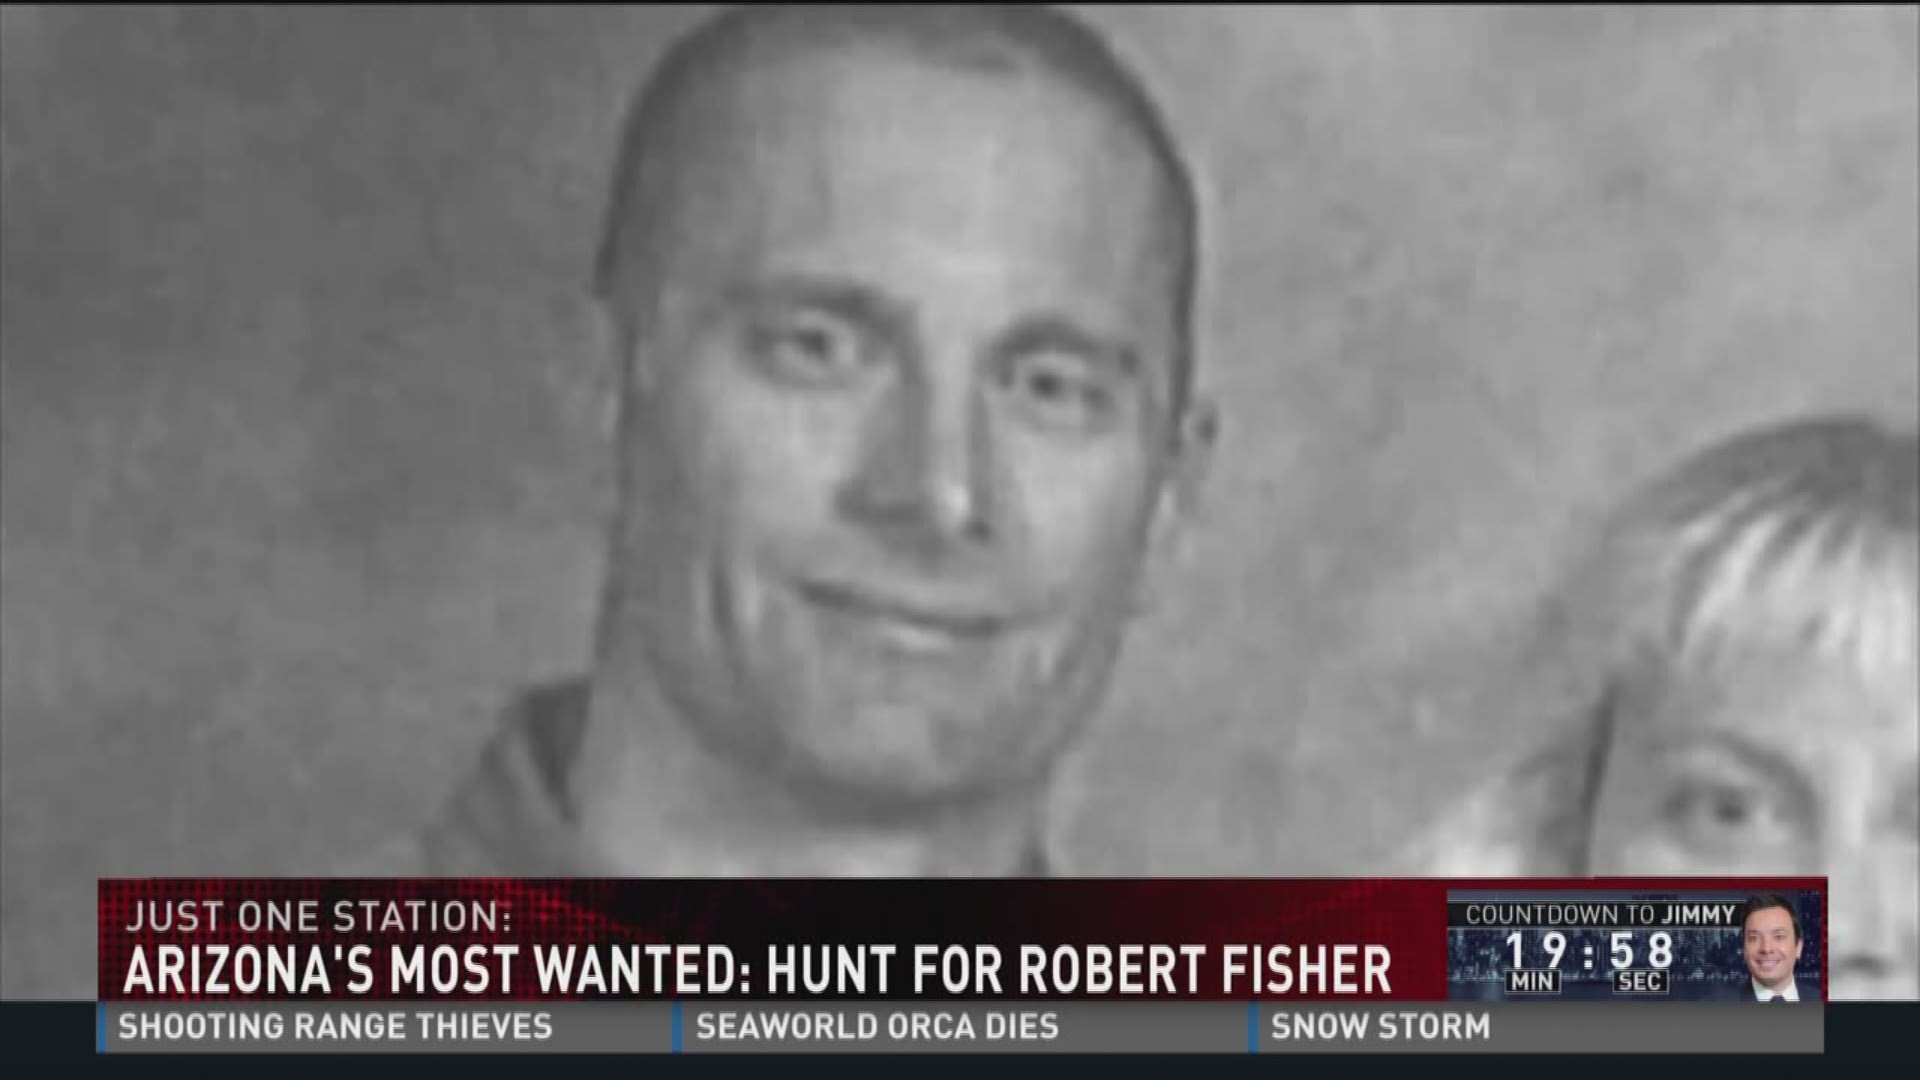 Arizona's most wanted: Hunt for Robert Fisher.